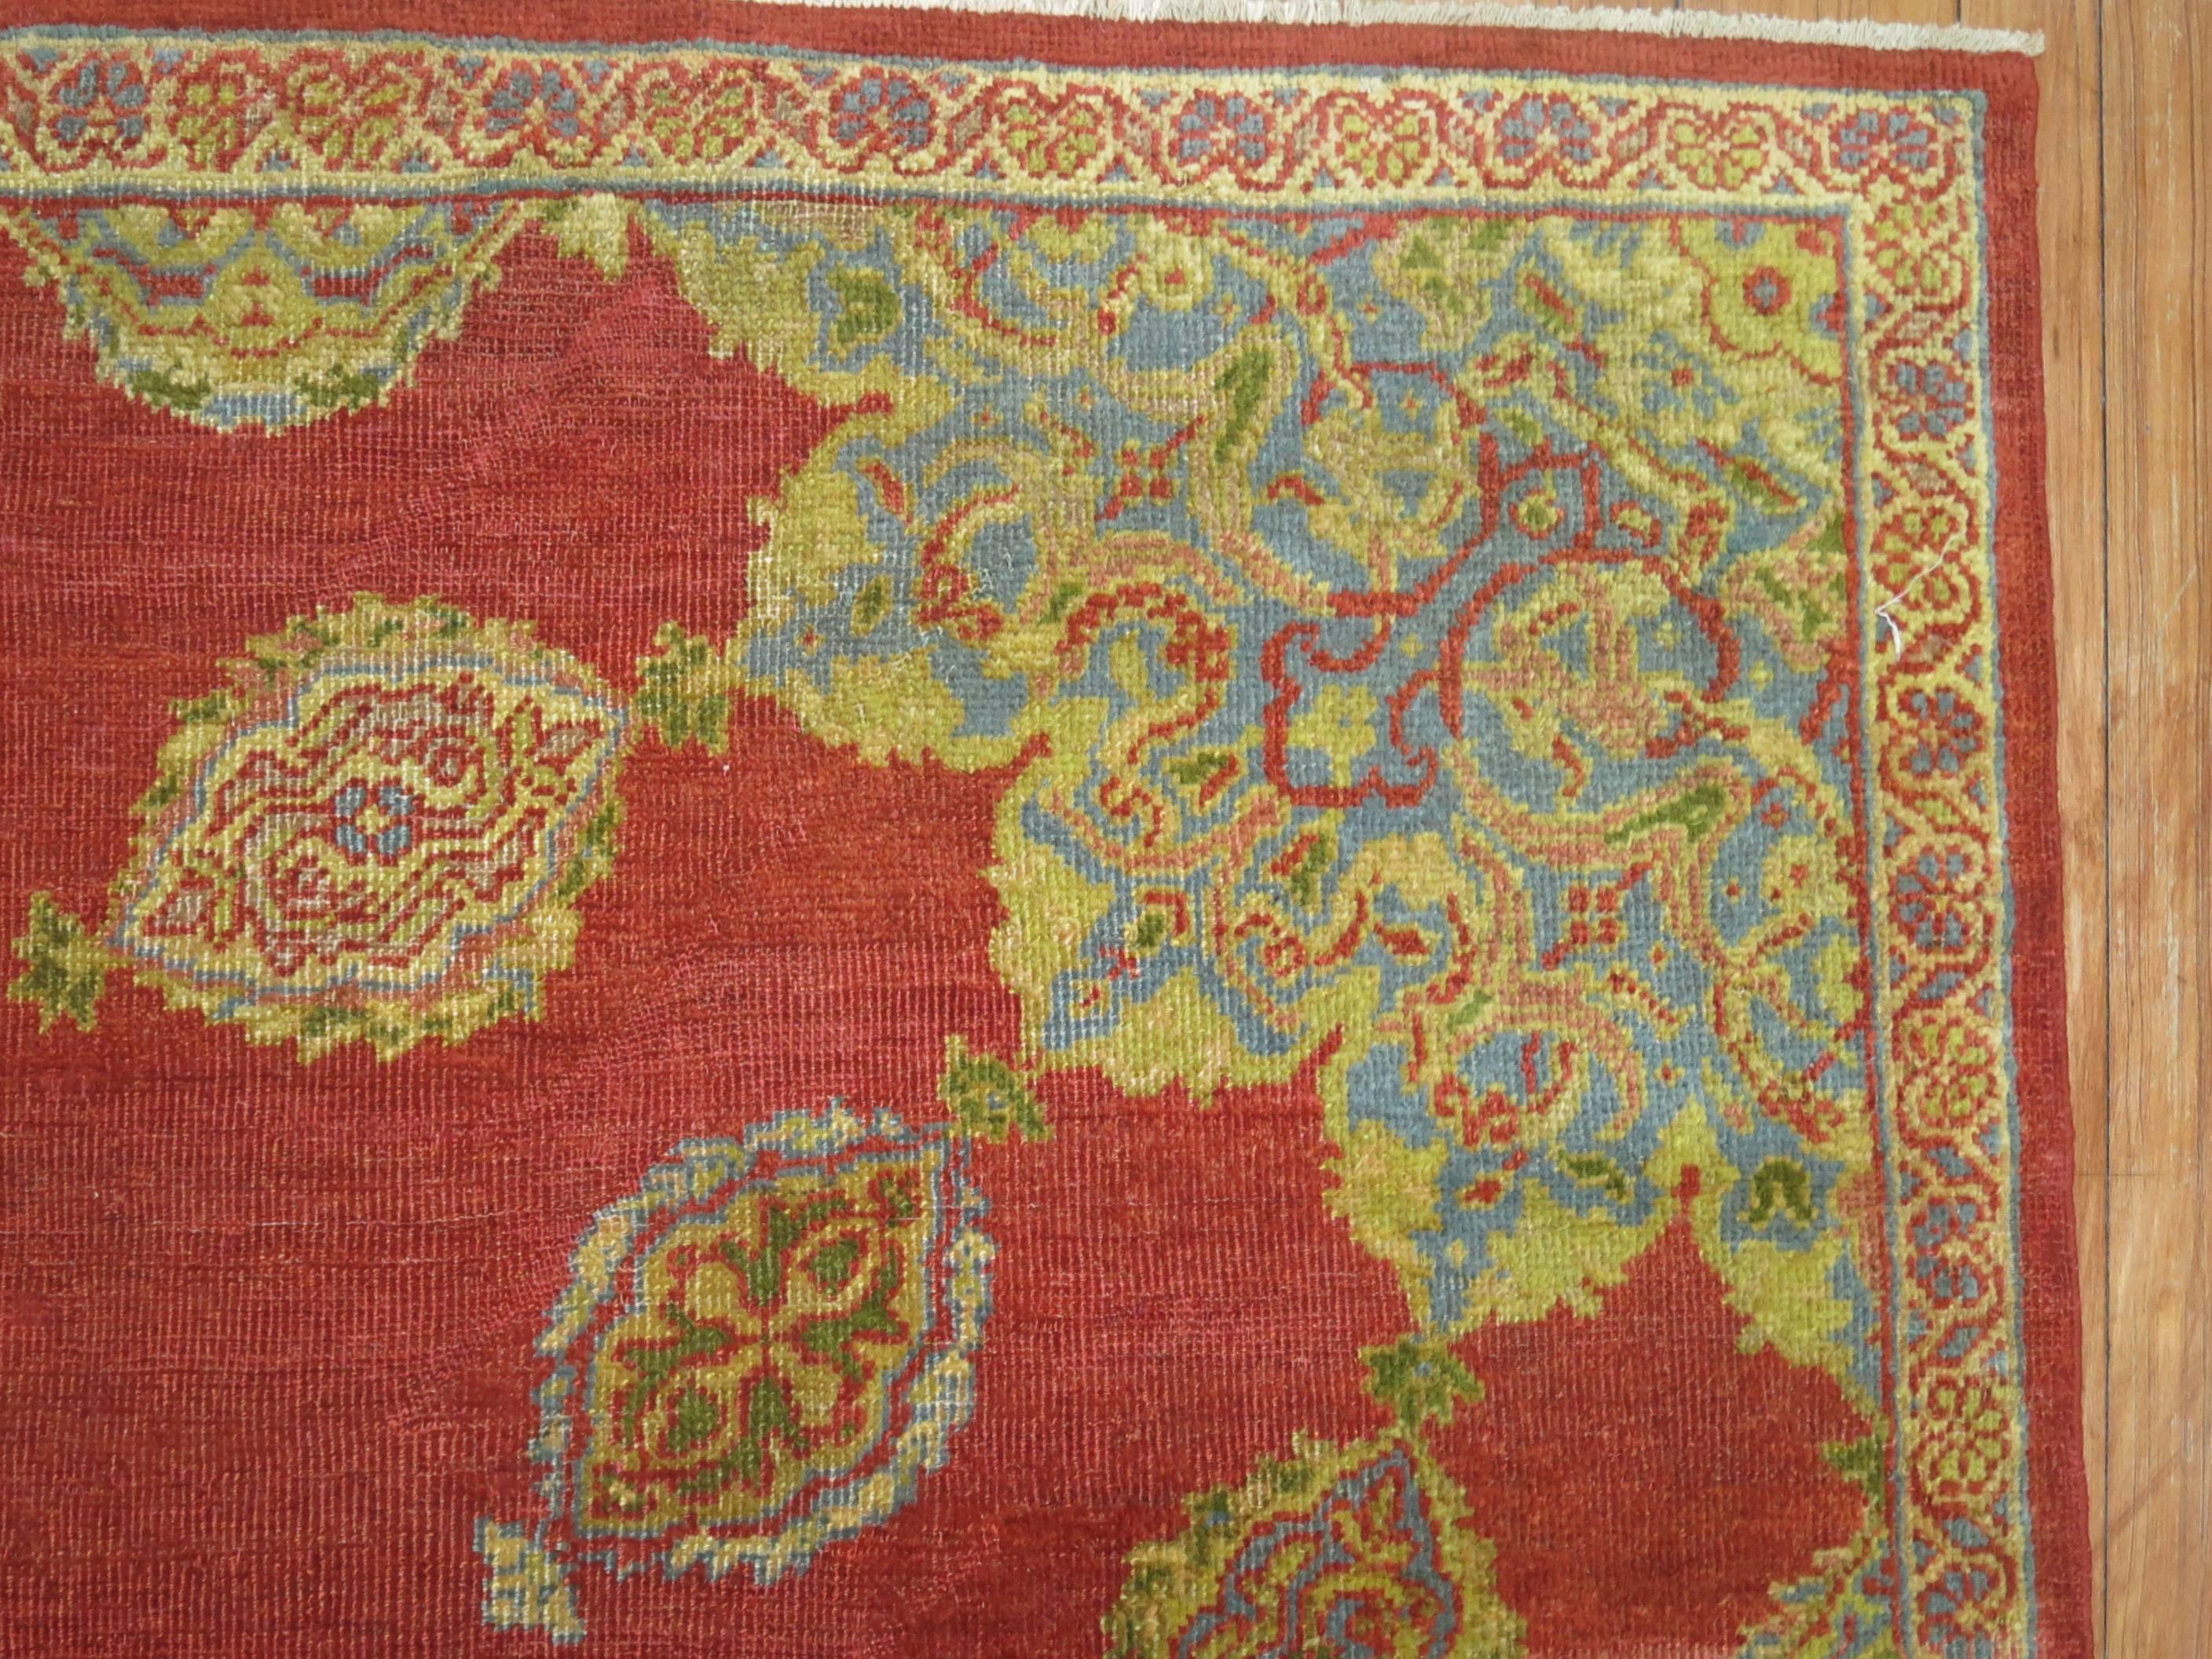 19th Century Antique Persian Ziegler Sultanabad Sampler Rug For Sale